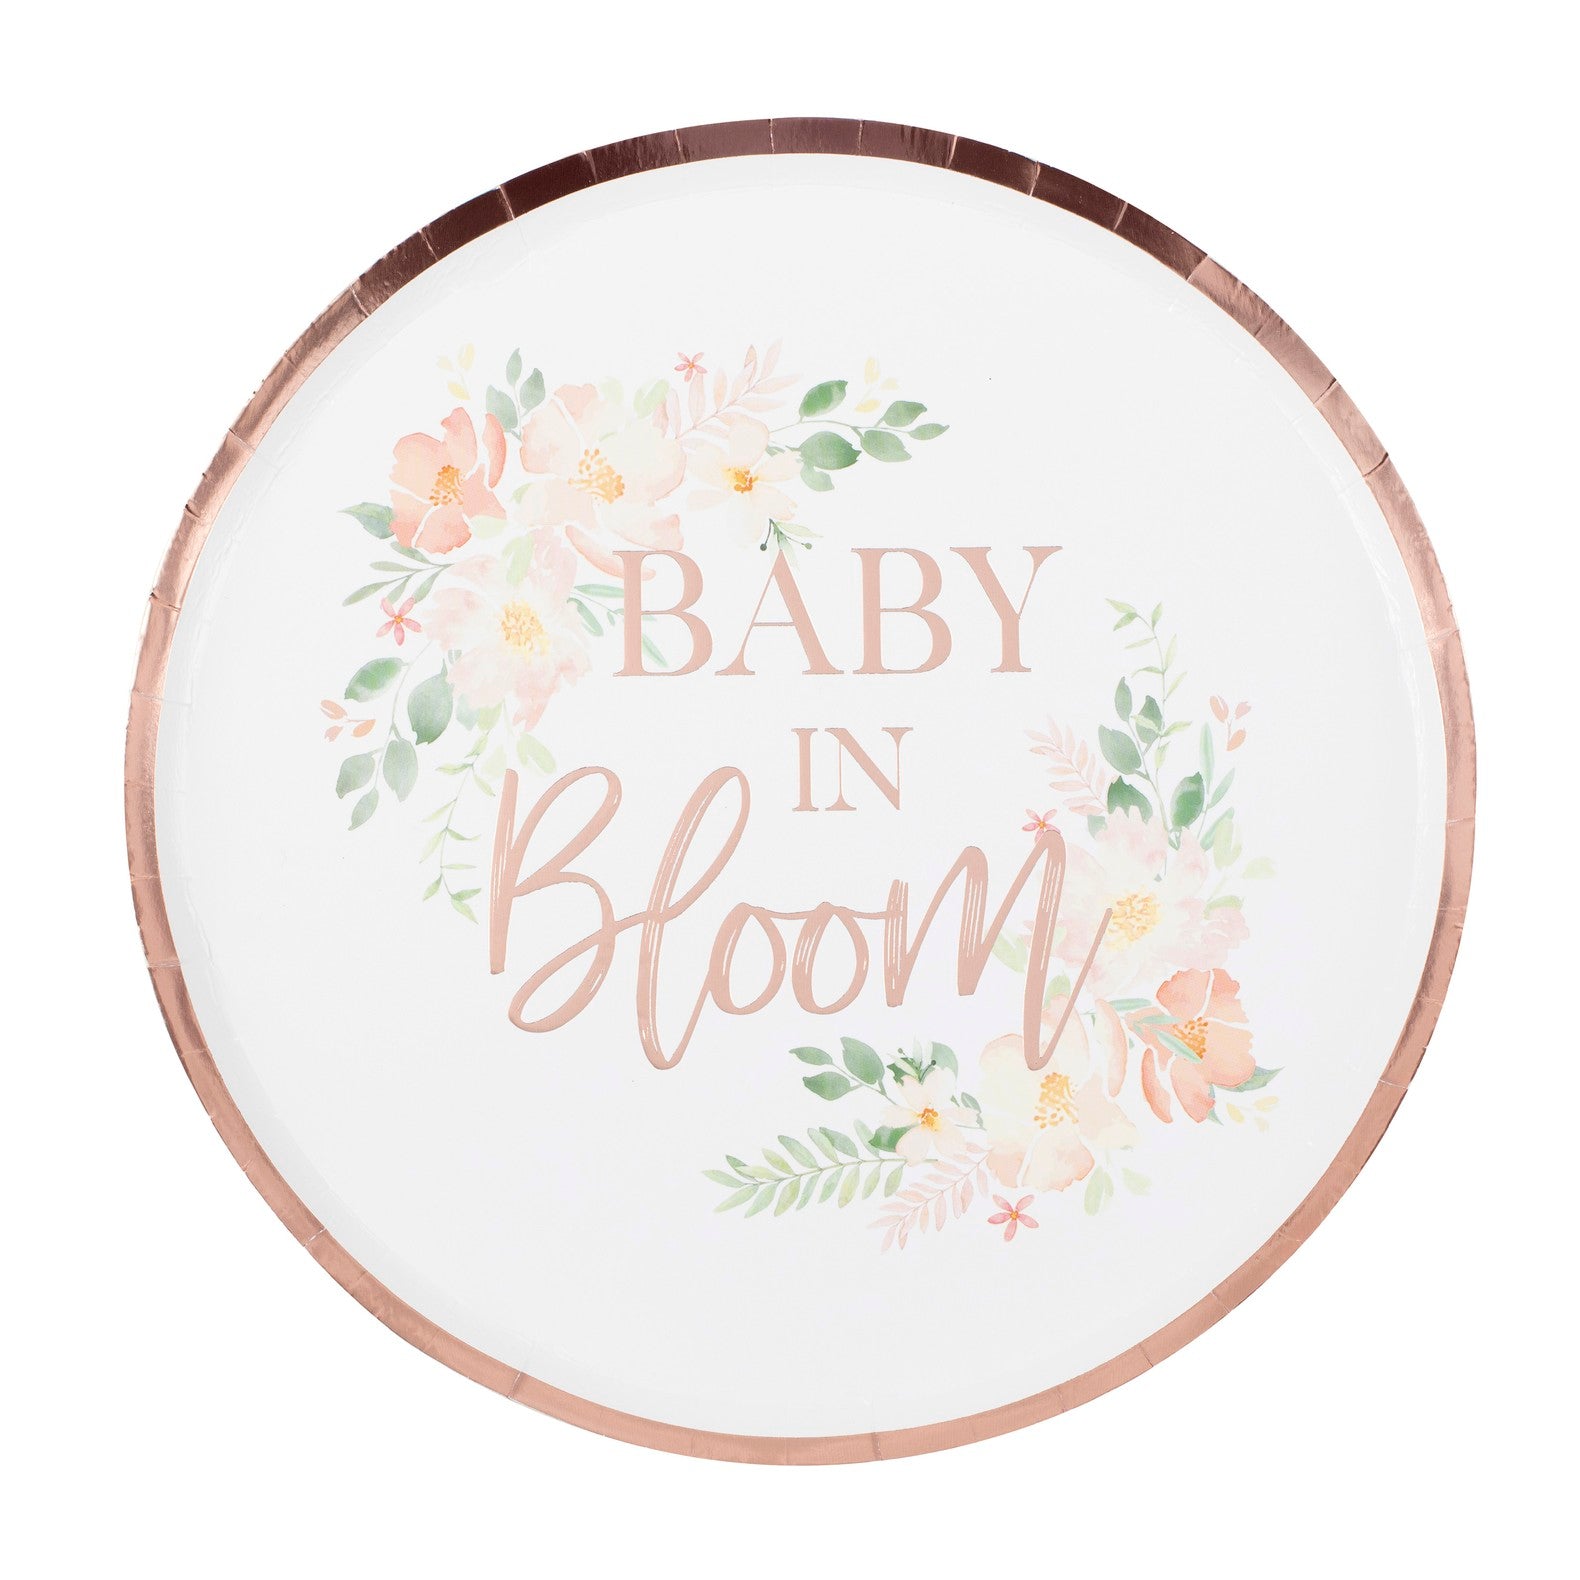 Assiettes "Baby in bloom" Baby shower x 8